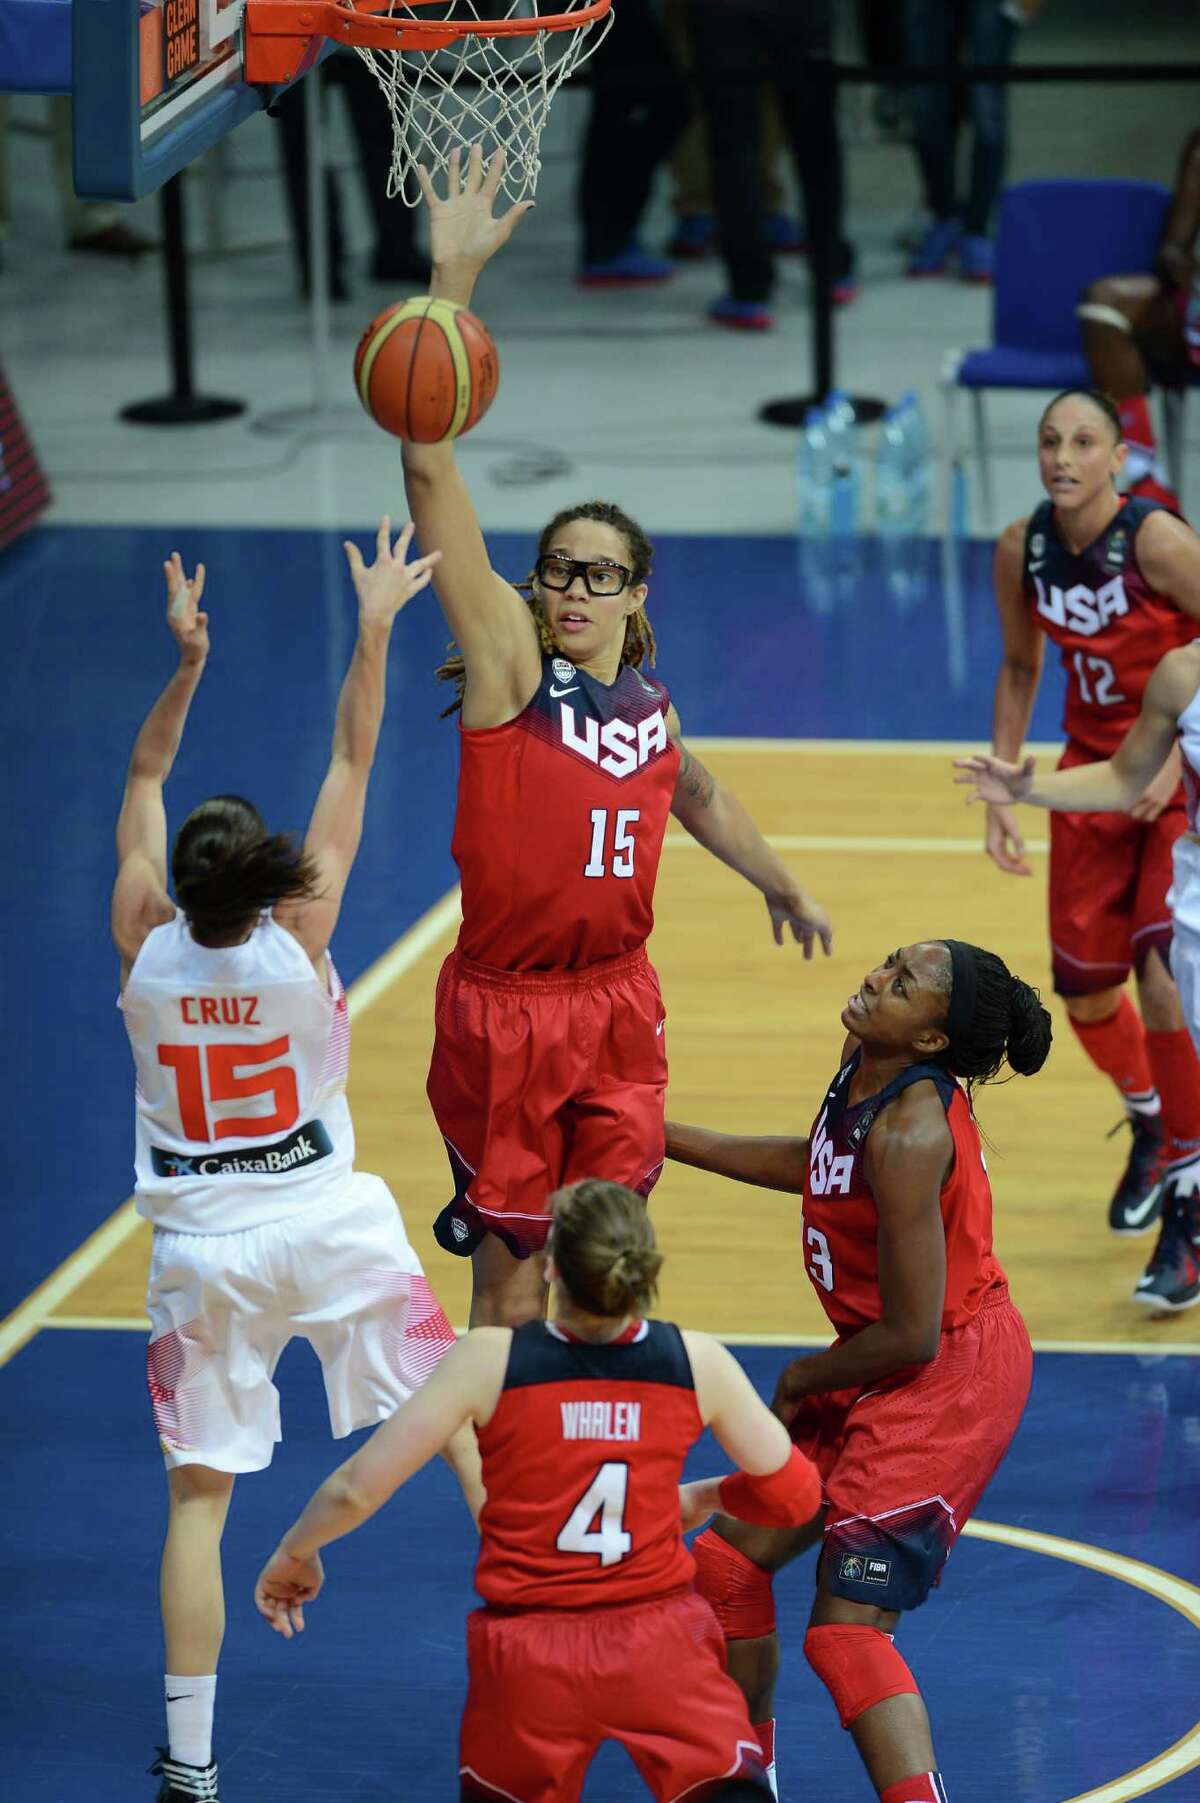 Brittney Griner blocks a shot for the U.S. during Sunday's 77-64 victory over Spain in which Griner scored 11 points.